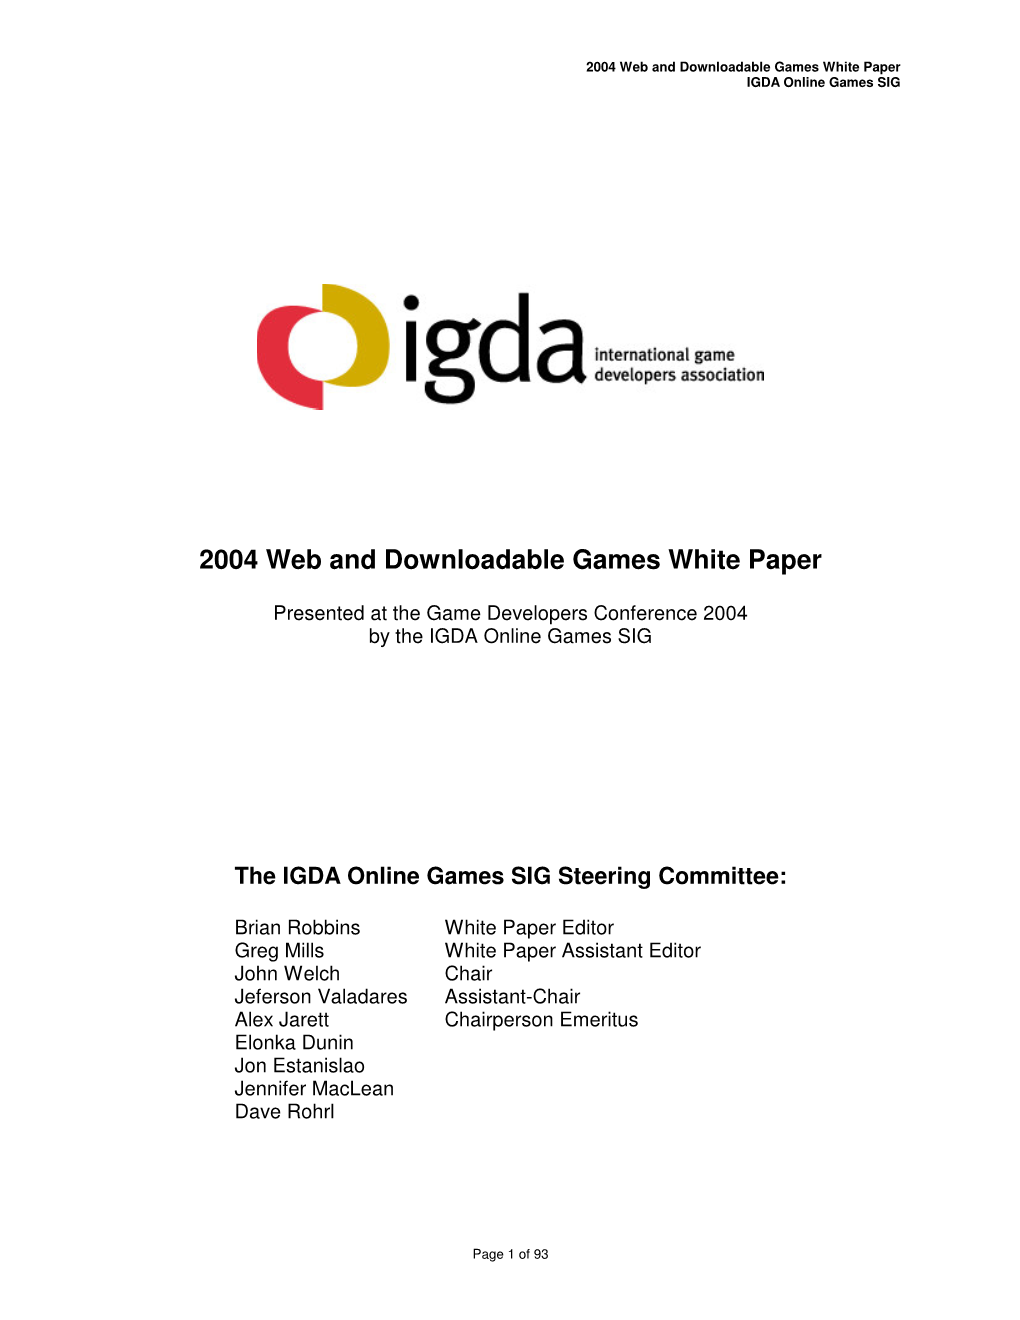 2004 Web and Downloadable Games White Paper IGDA Online Games SIG